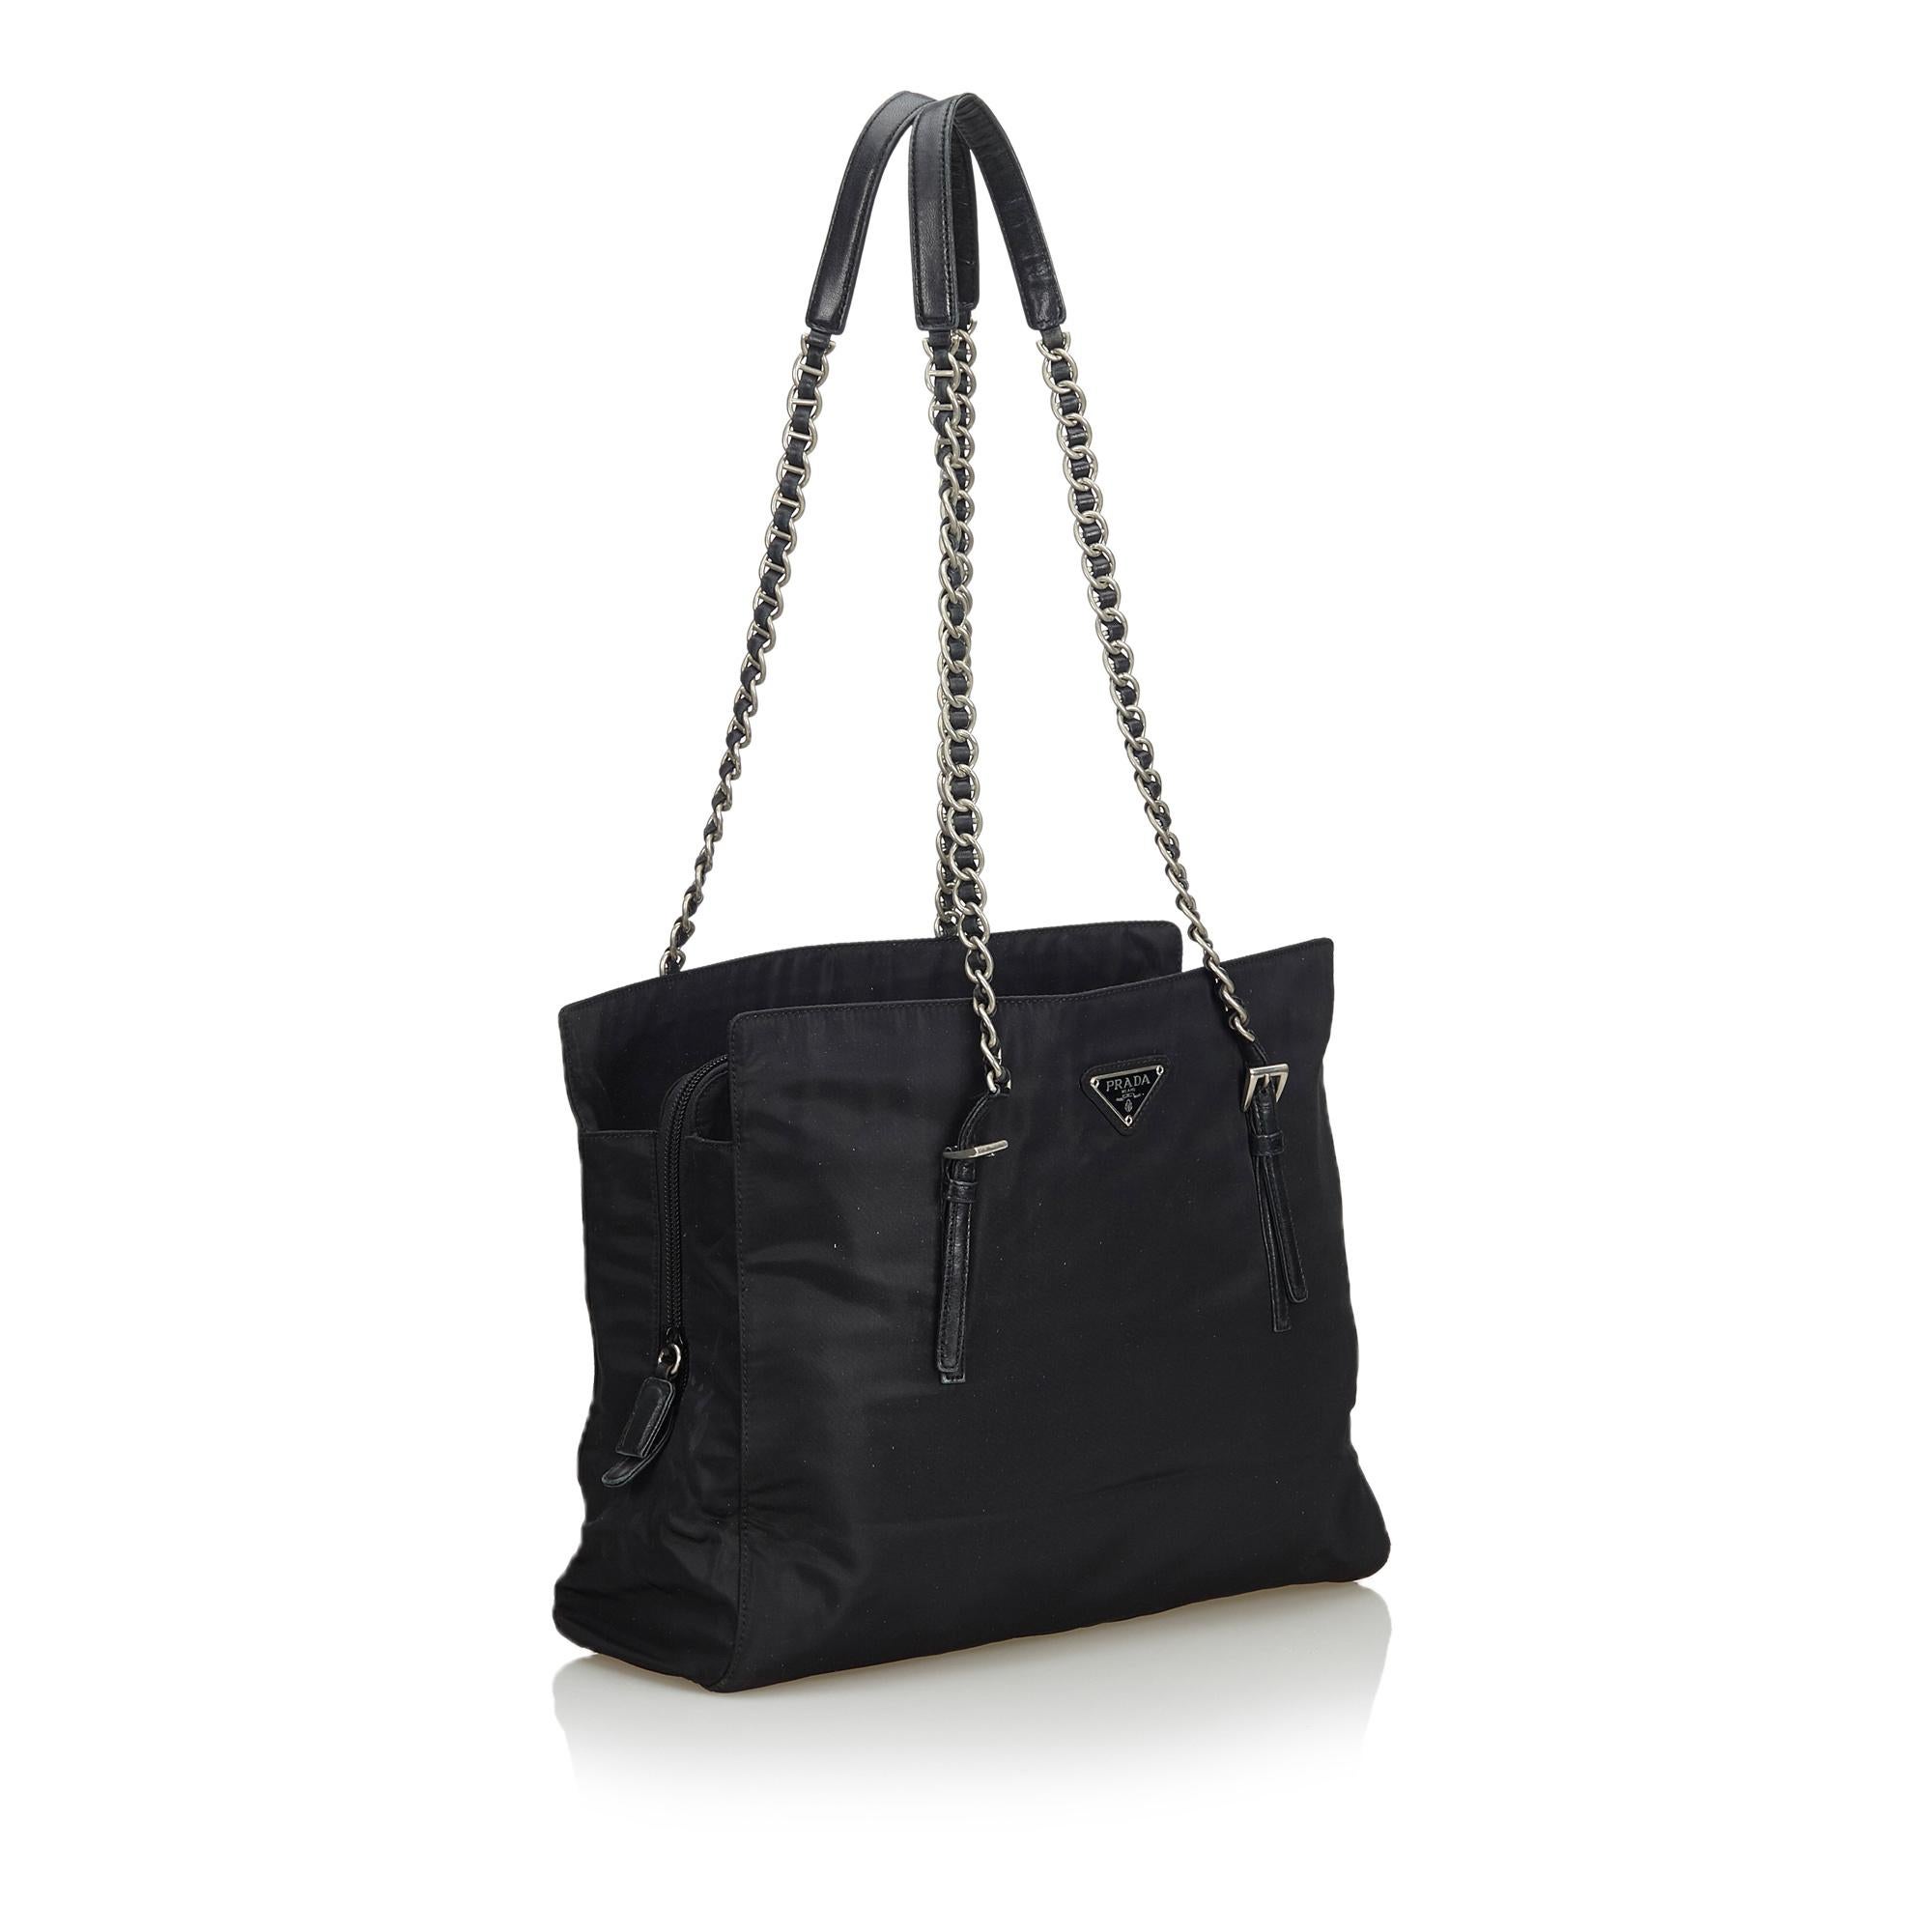 This shoulder bag features a nylon body, flat leather straps with silver-tone chain, a top zip closure, and an interior zip pocket. It carries as B+ condition rating.

Inclusions: 
This item does not come with inclusions.

Dimensions:
Length: 25.00